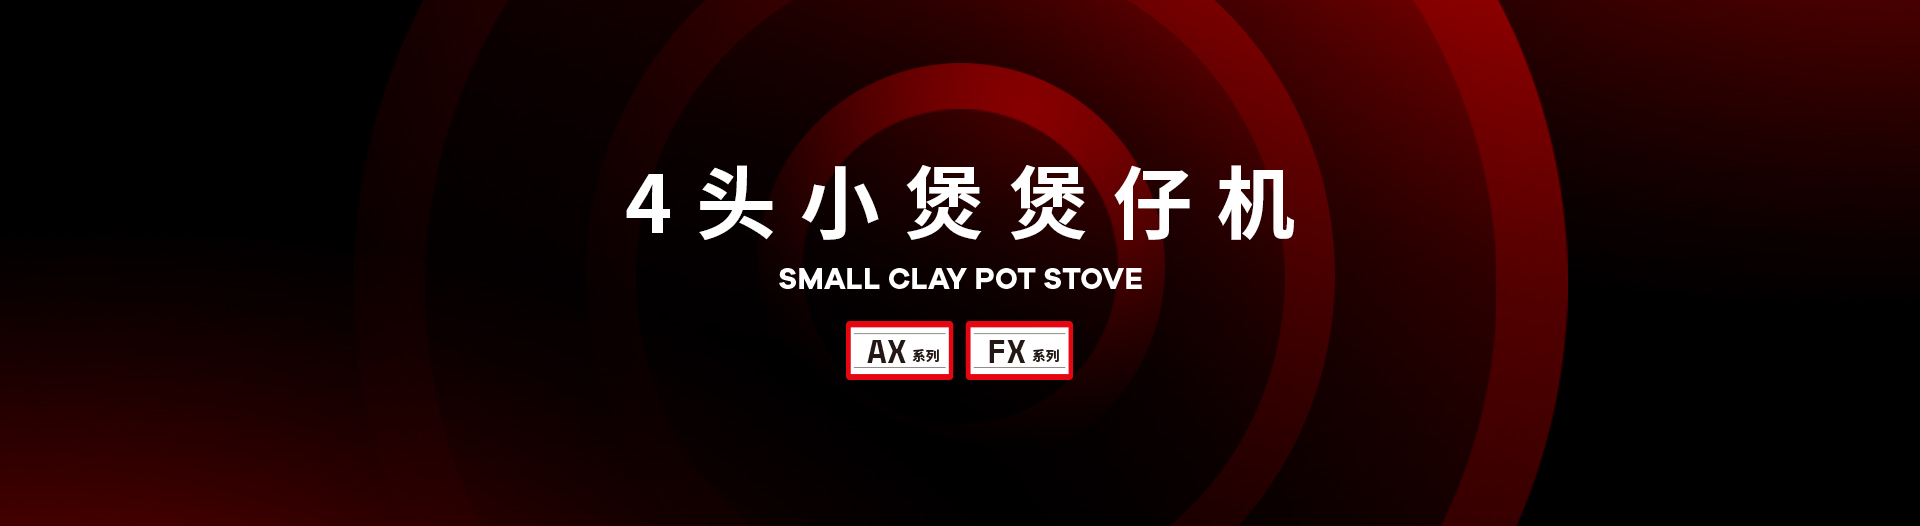 sinswey_engineering_sinswey_engineering_product_small_clay_pot_stove_details_page_banner.jpg